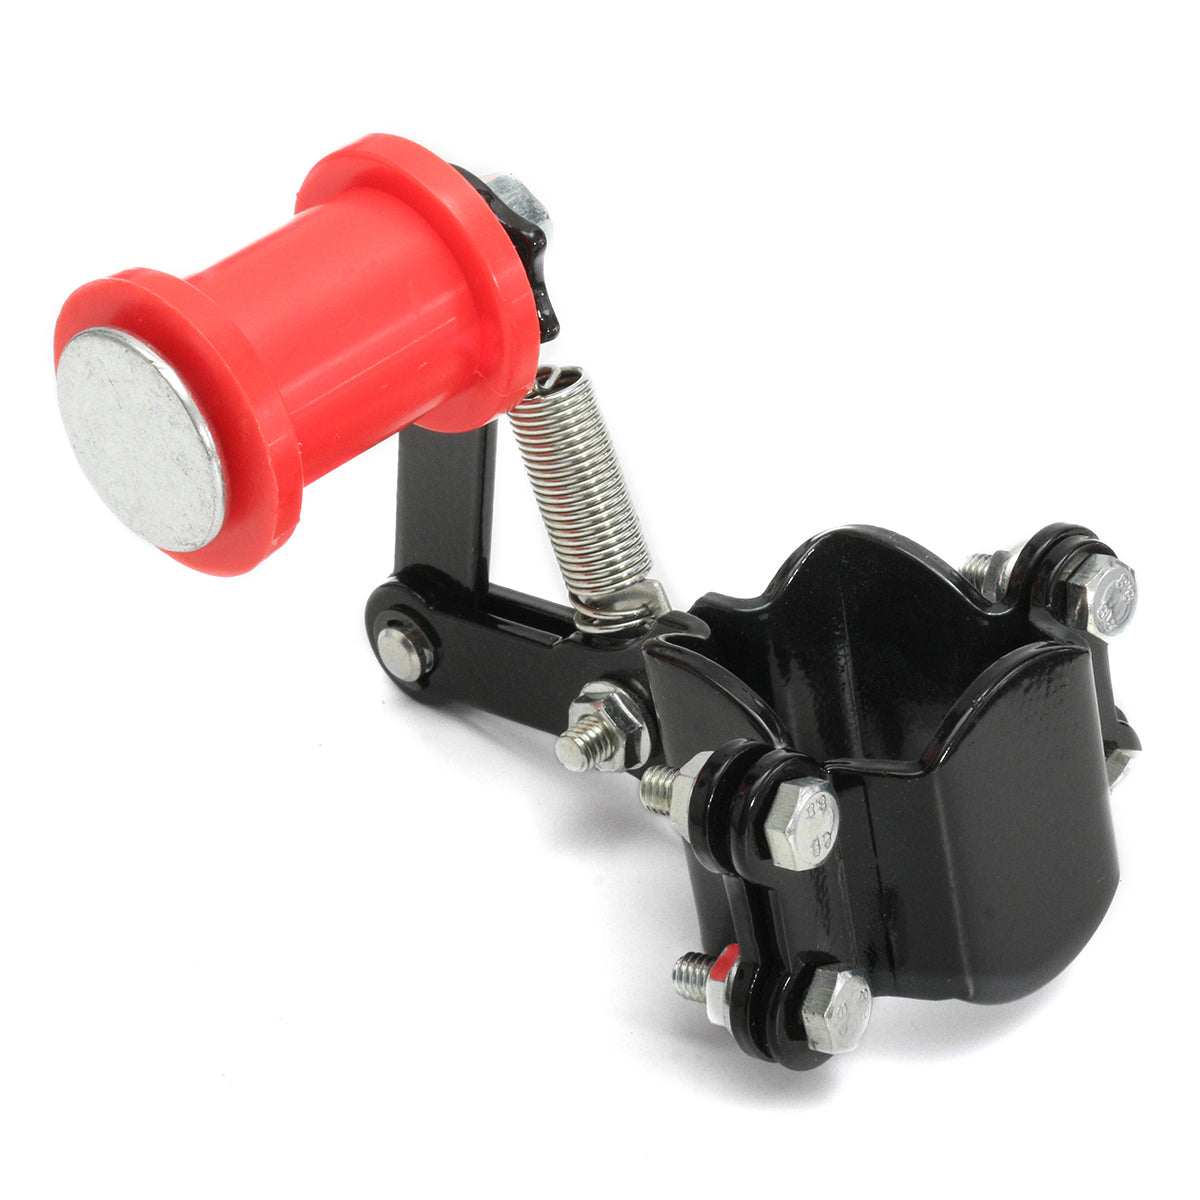 Tomato Chain Automatic Tensioner Roller Adjuster Regulator Tool Motorcycle Bicycle Universal